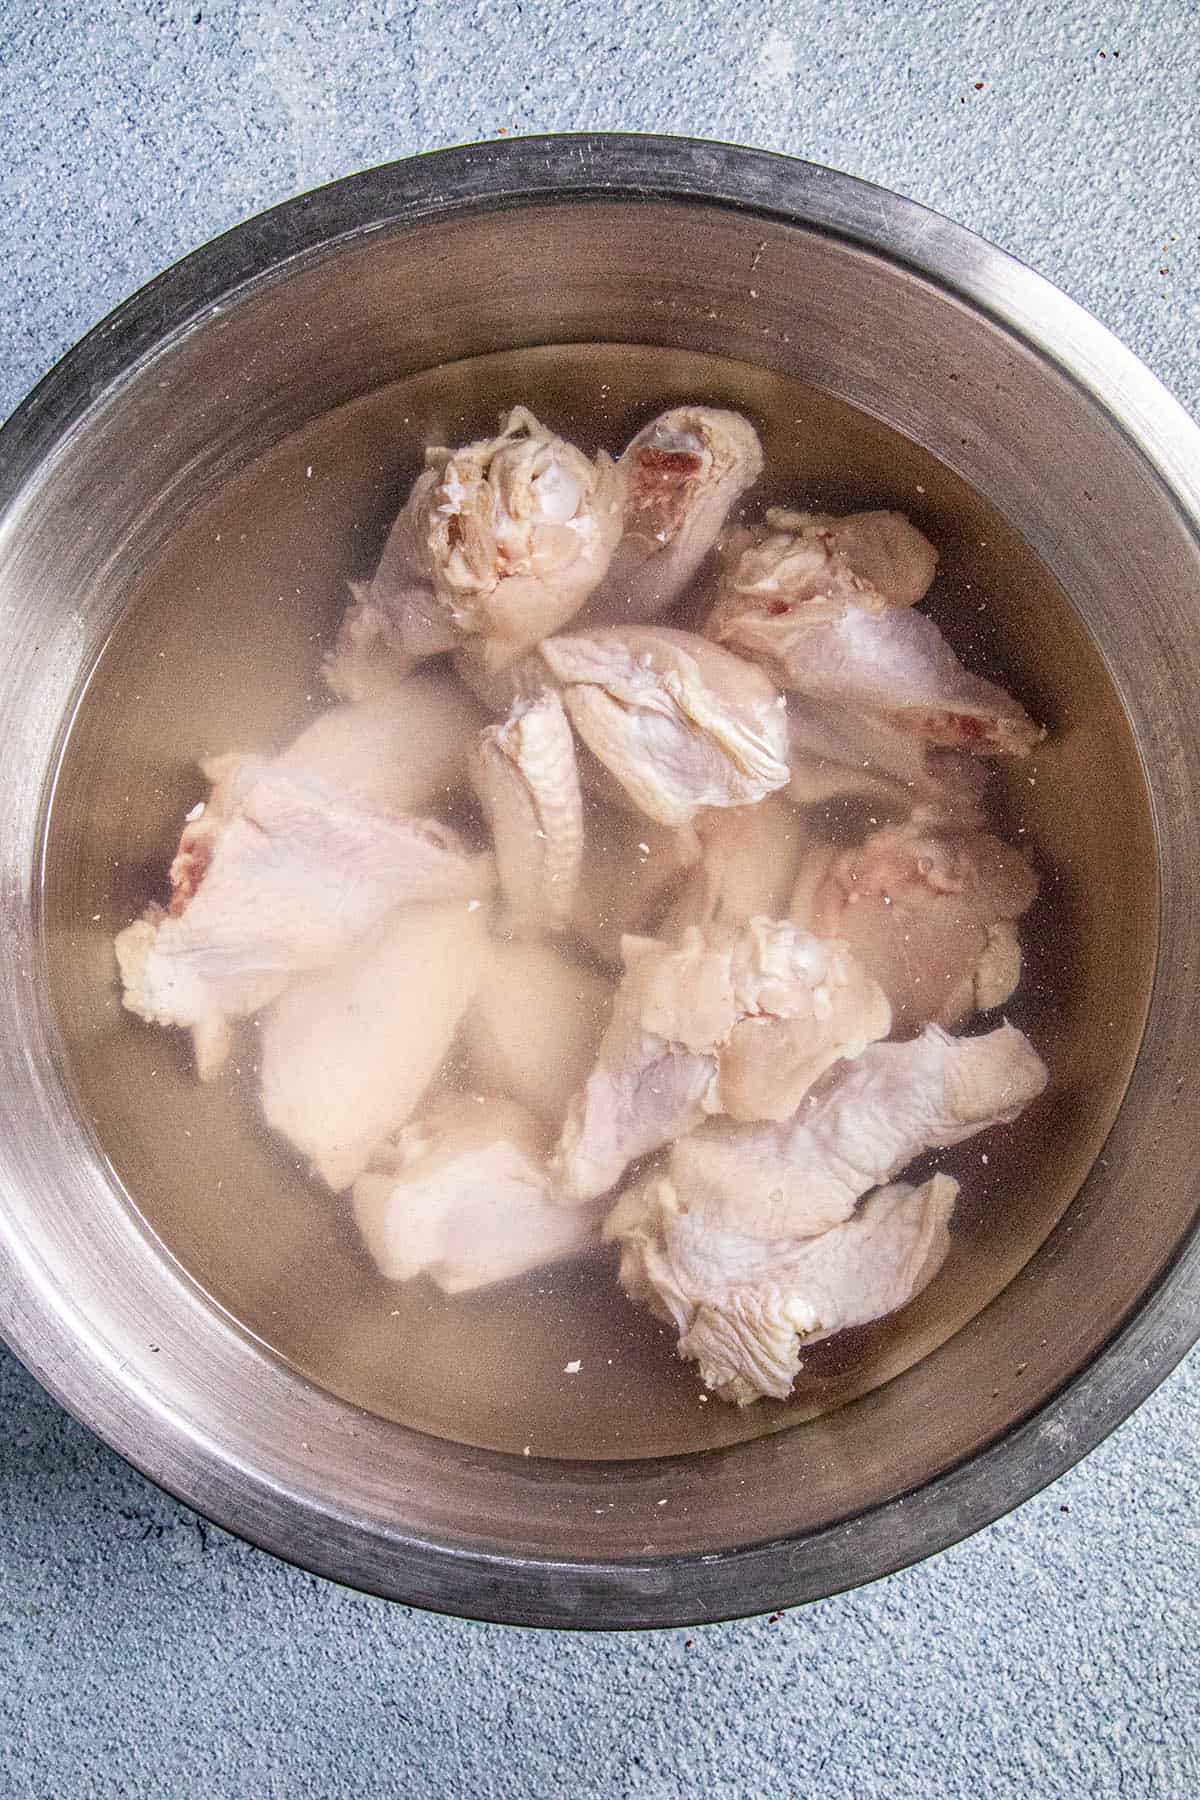 Brining chicken wings to make fried chicken wings